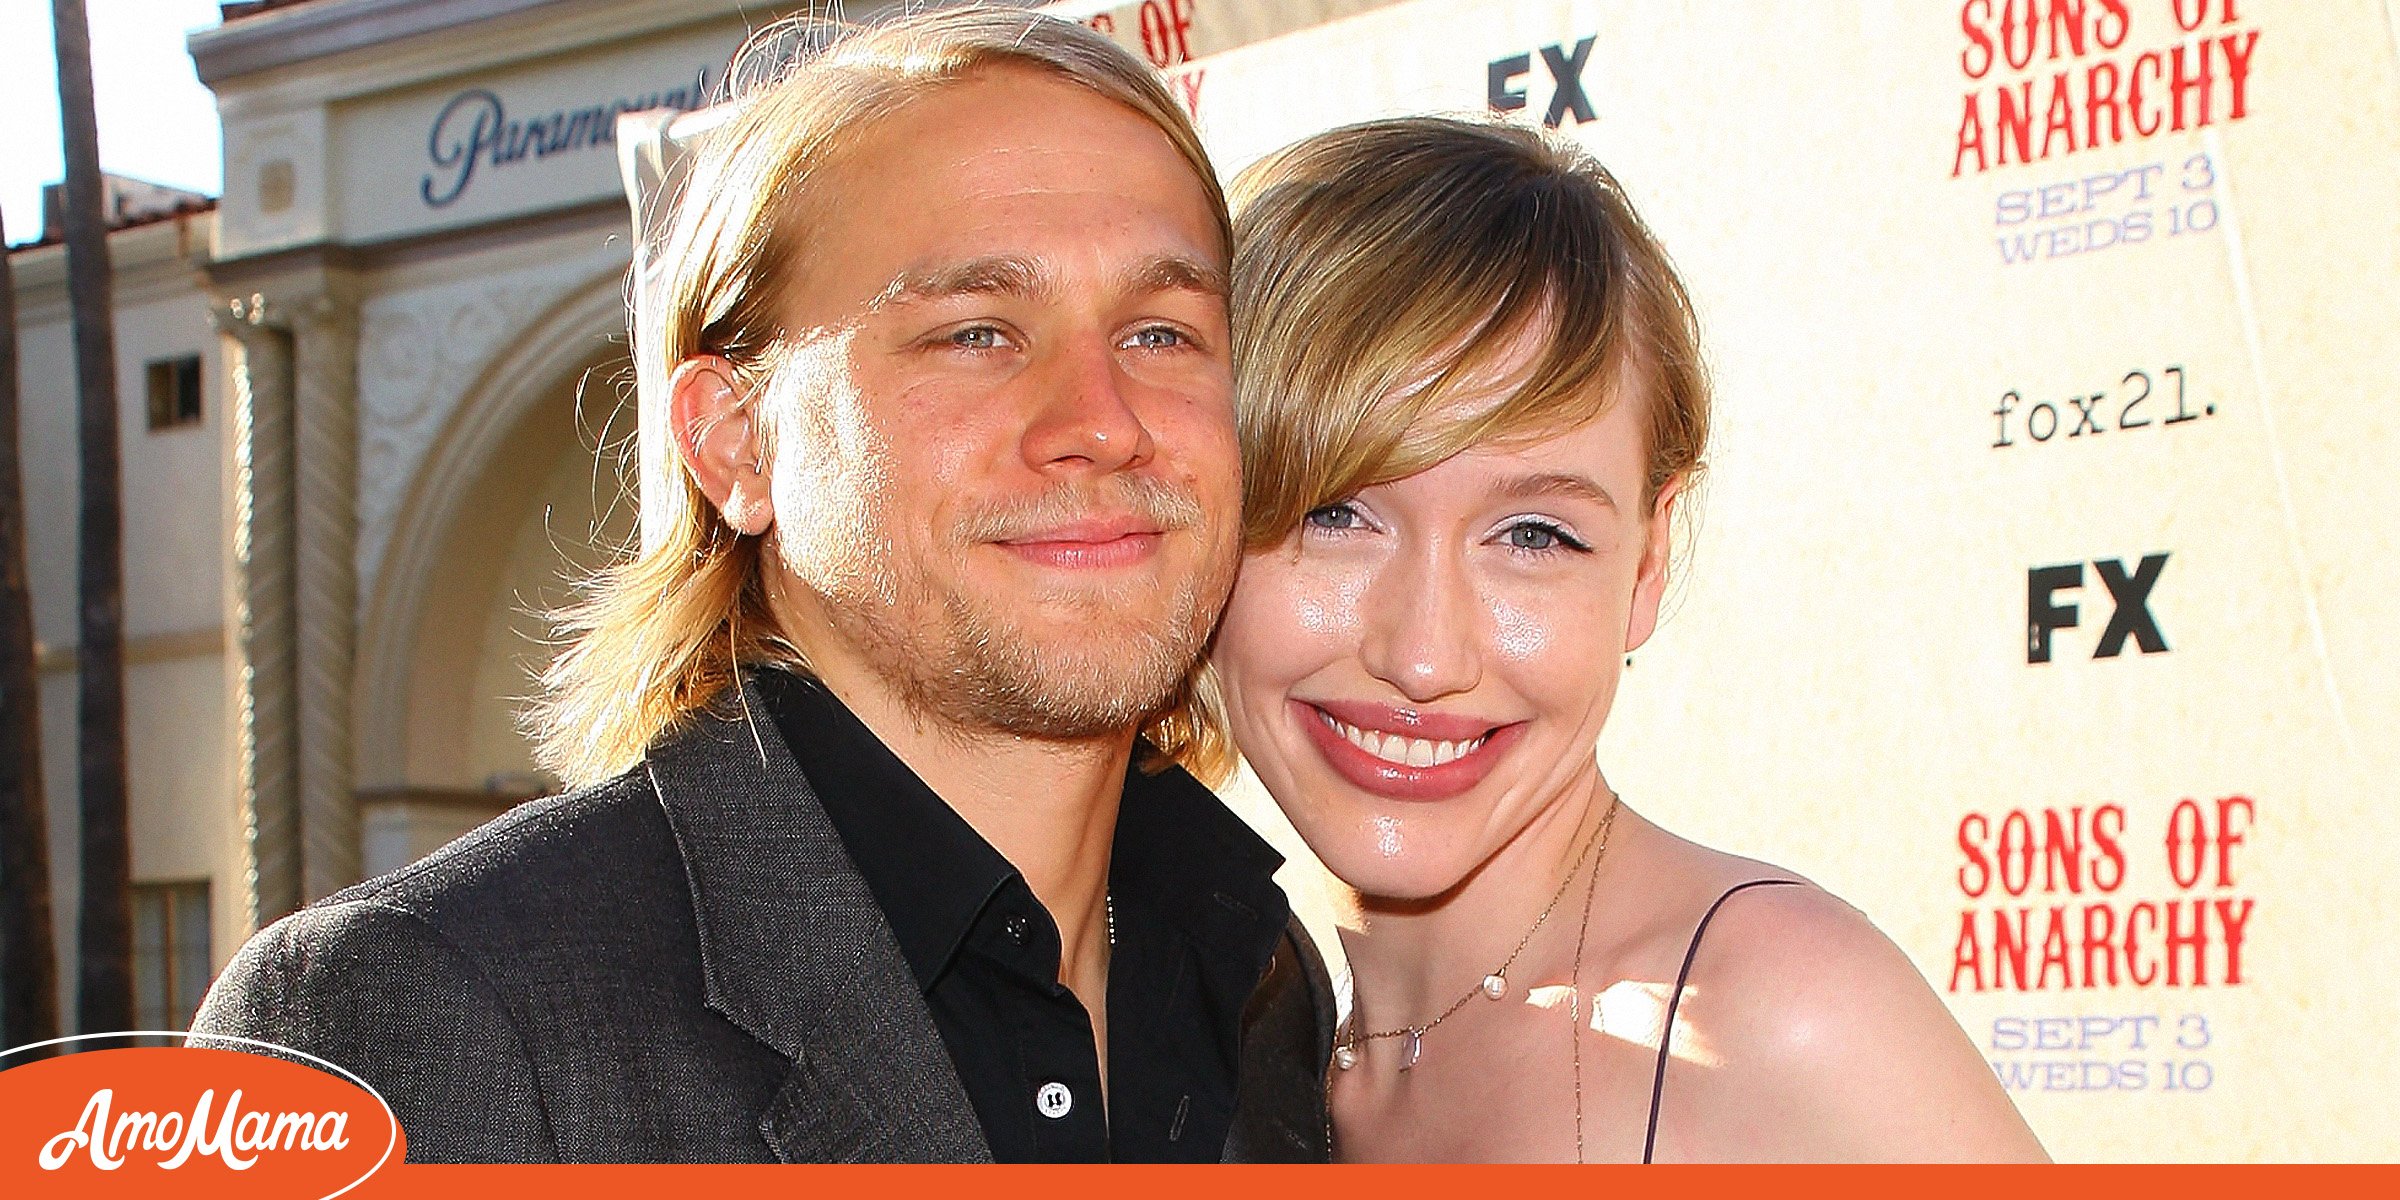 Charlie Hunnam has a wife? The Inside Story of Charlie Hunnam’s Long-Term Relationship With Morgana McNelis